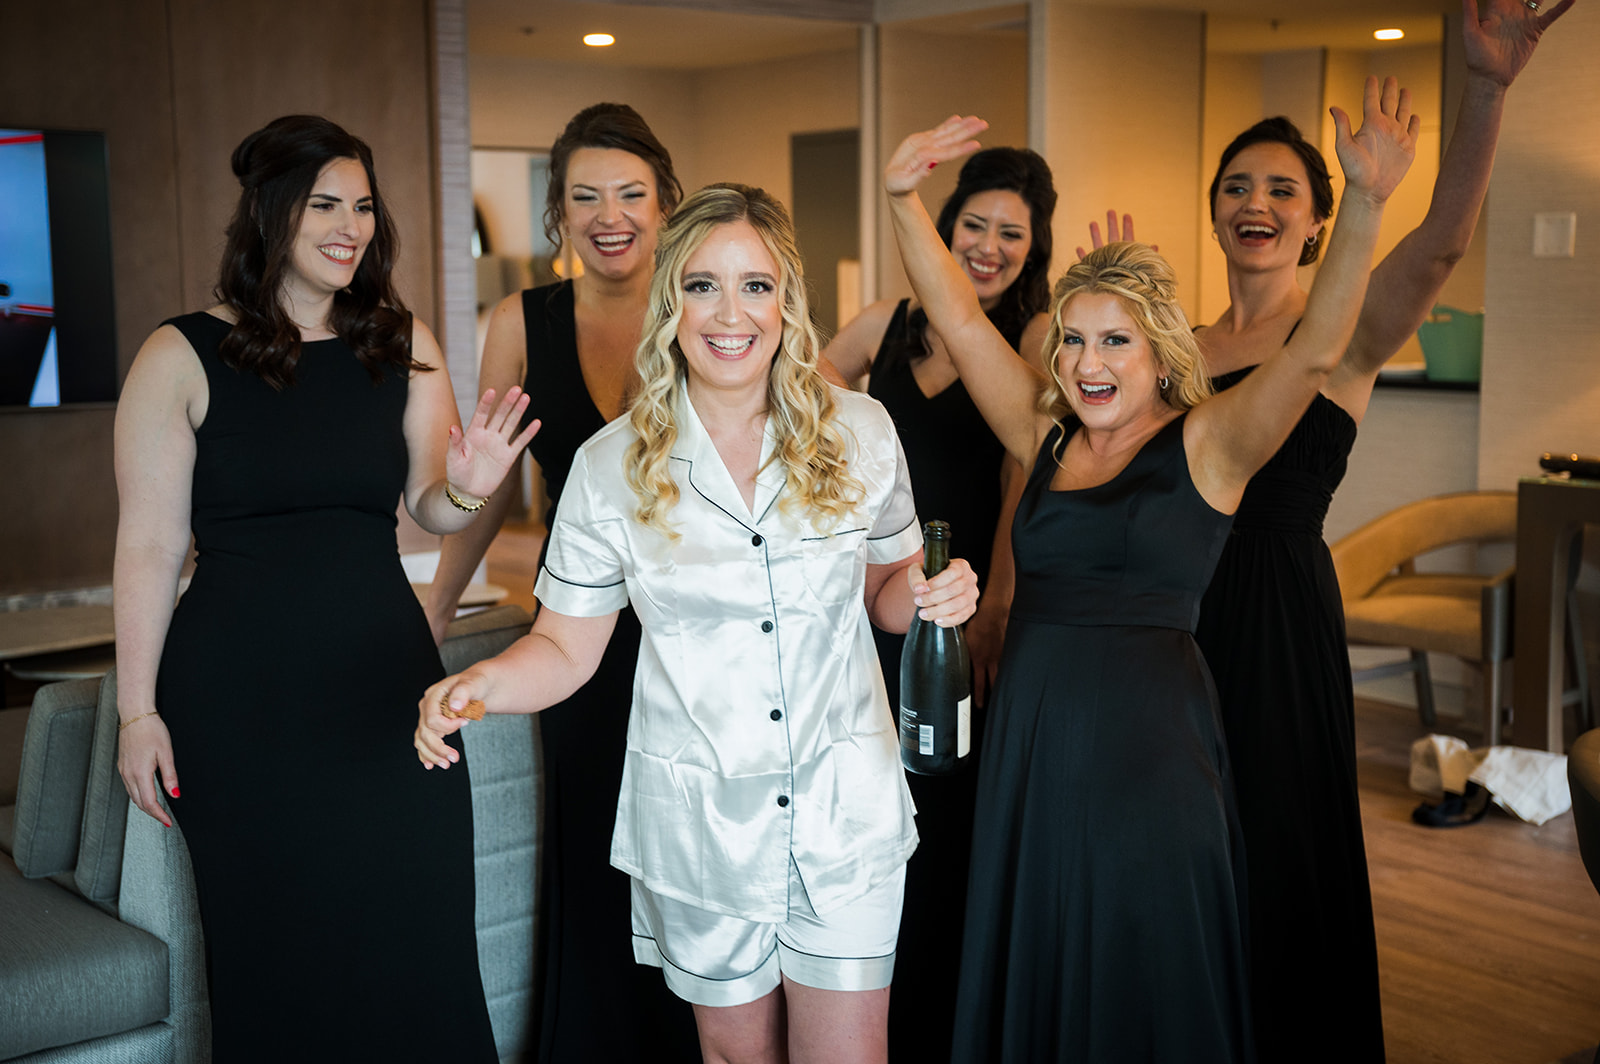 Bride holds a bottle of champagne surrounded by her bridesmaids who are celebrating